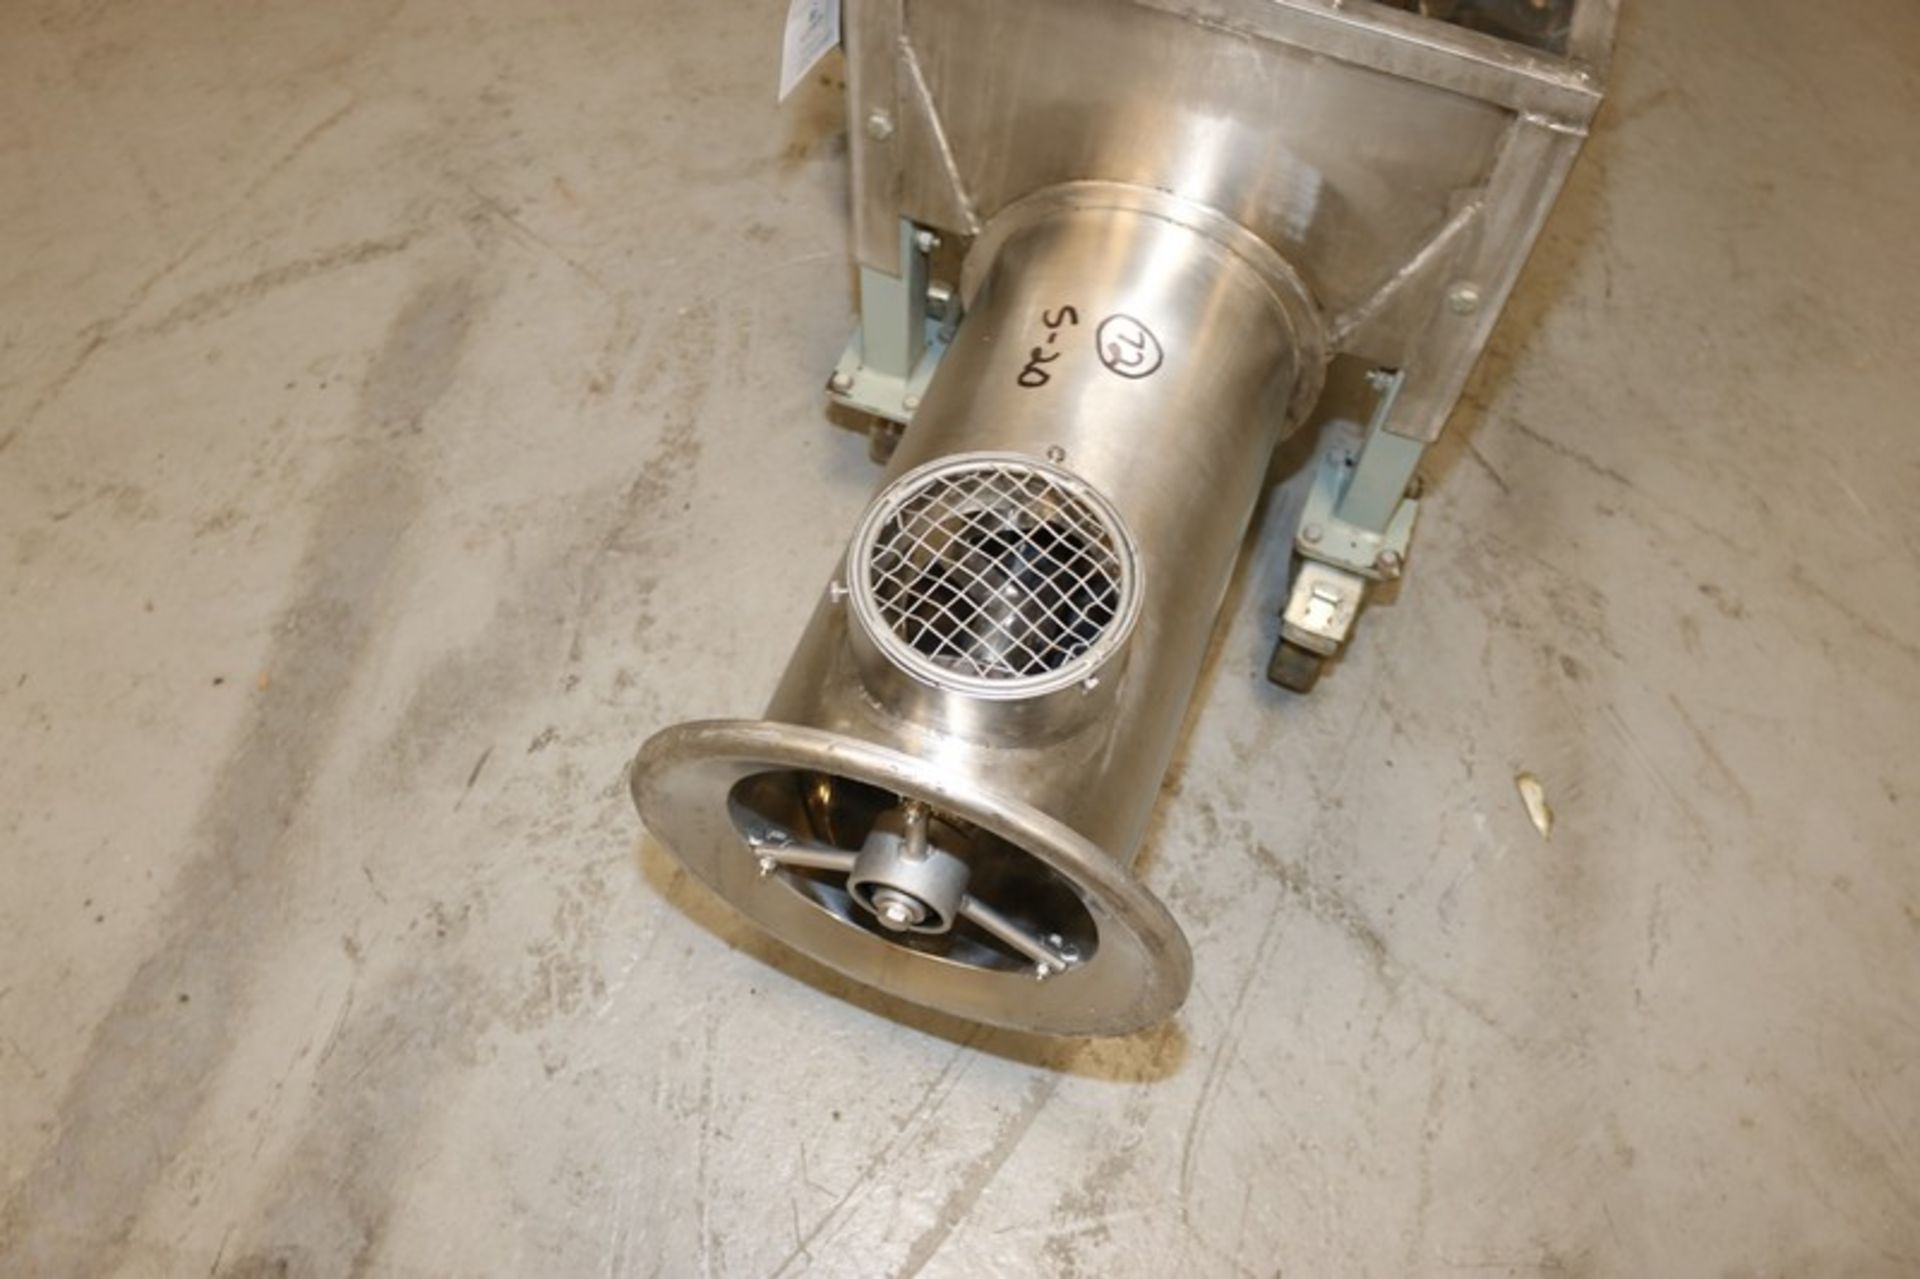 Floveyor S/S Screw Feeder, Type FM392dCE-47, S/N OTH10347, Mass 140 Kg, with S/S Dischage, Aprox. 9" - Image 11 of 12